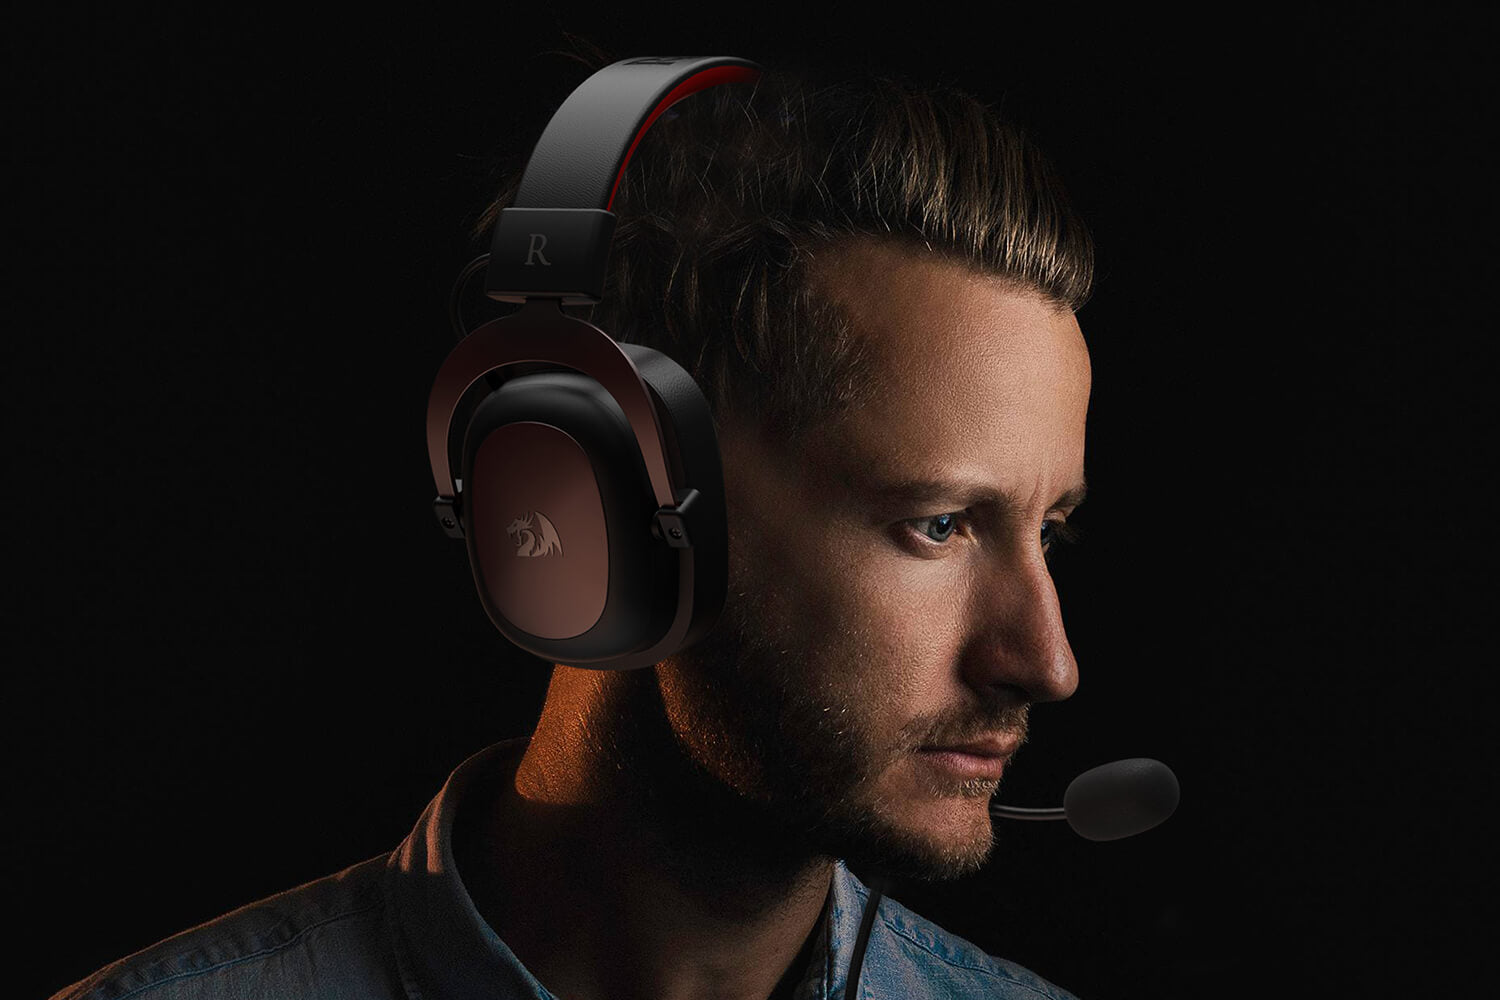 redragon h510 zeus wired gaming headset